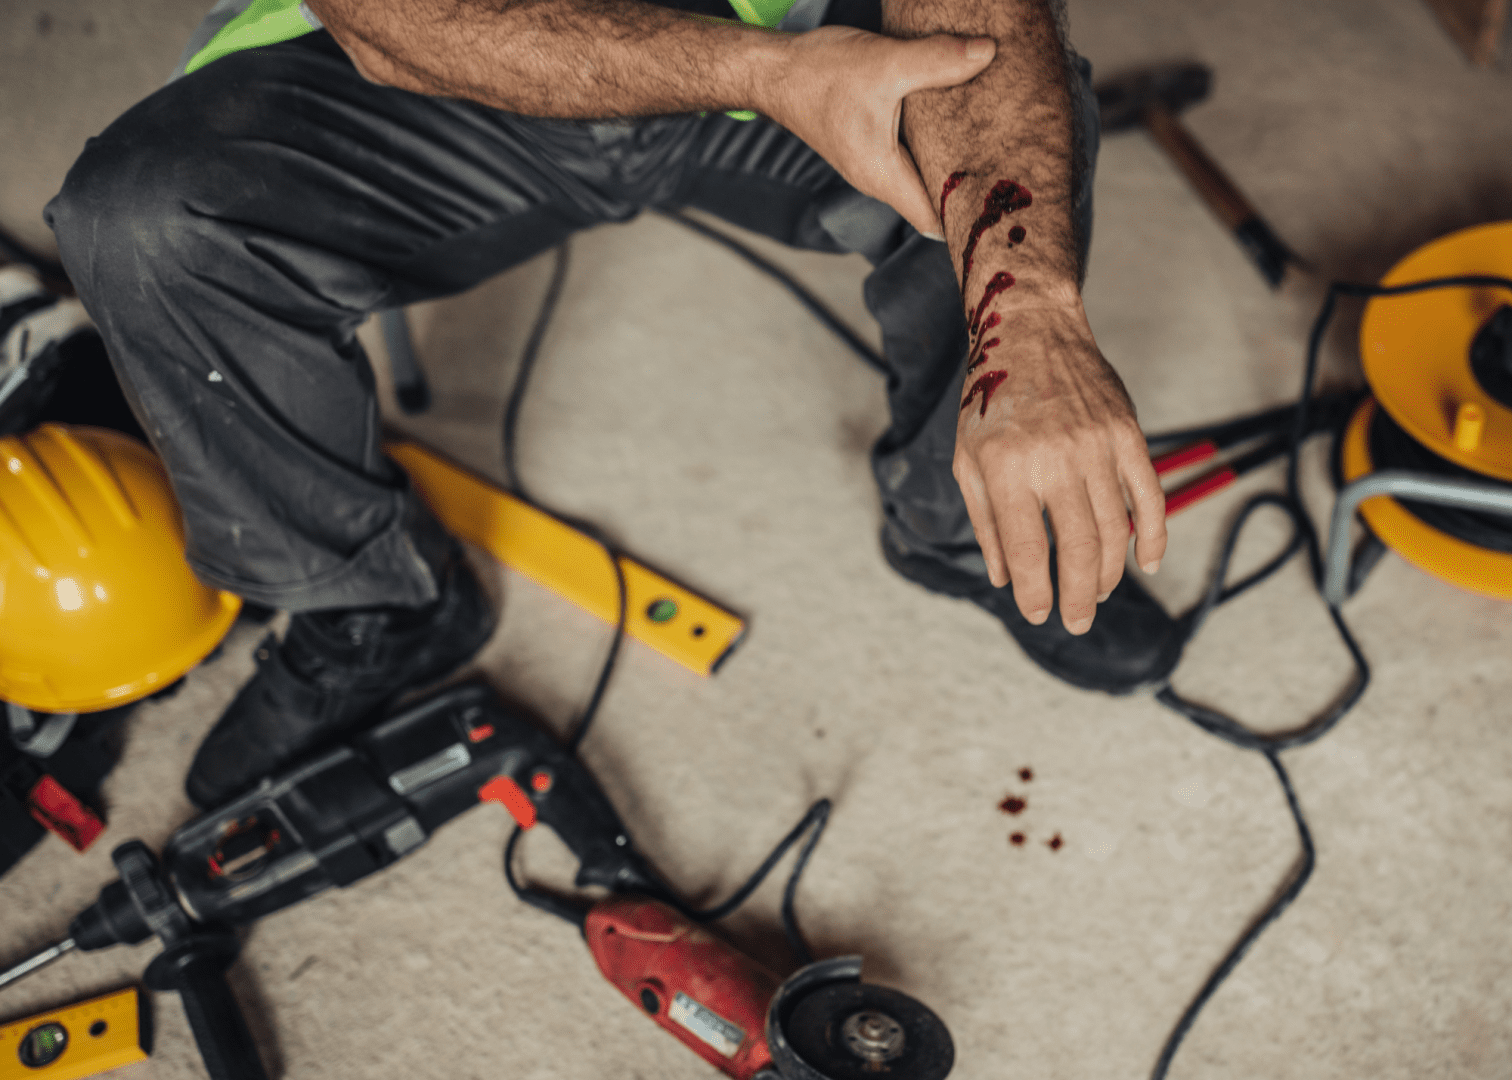 Worker's Comp Injury - Charlotte Worker's Comp Attorney